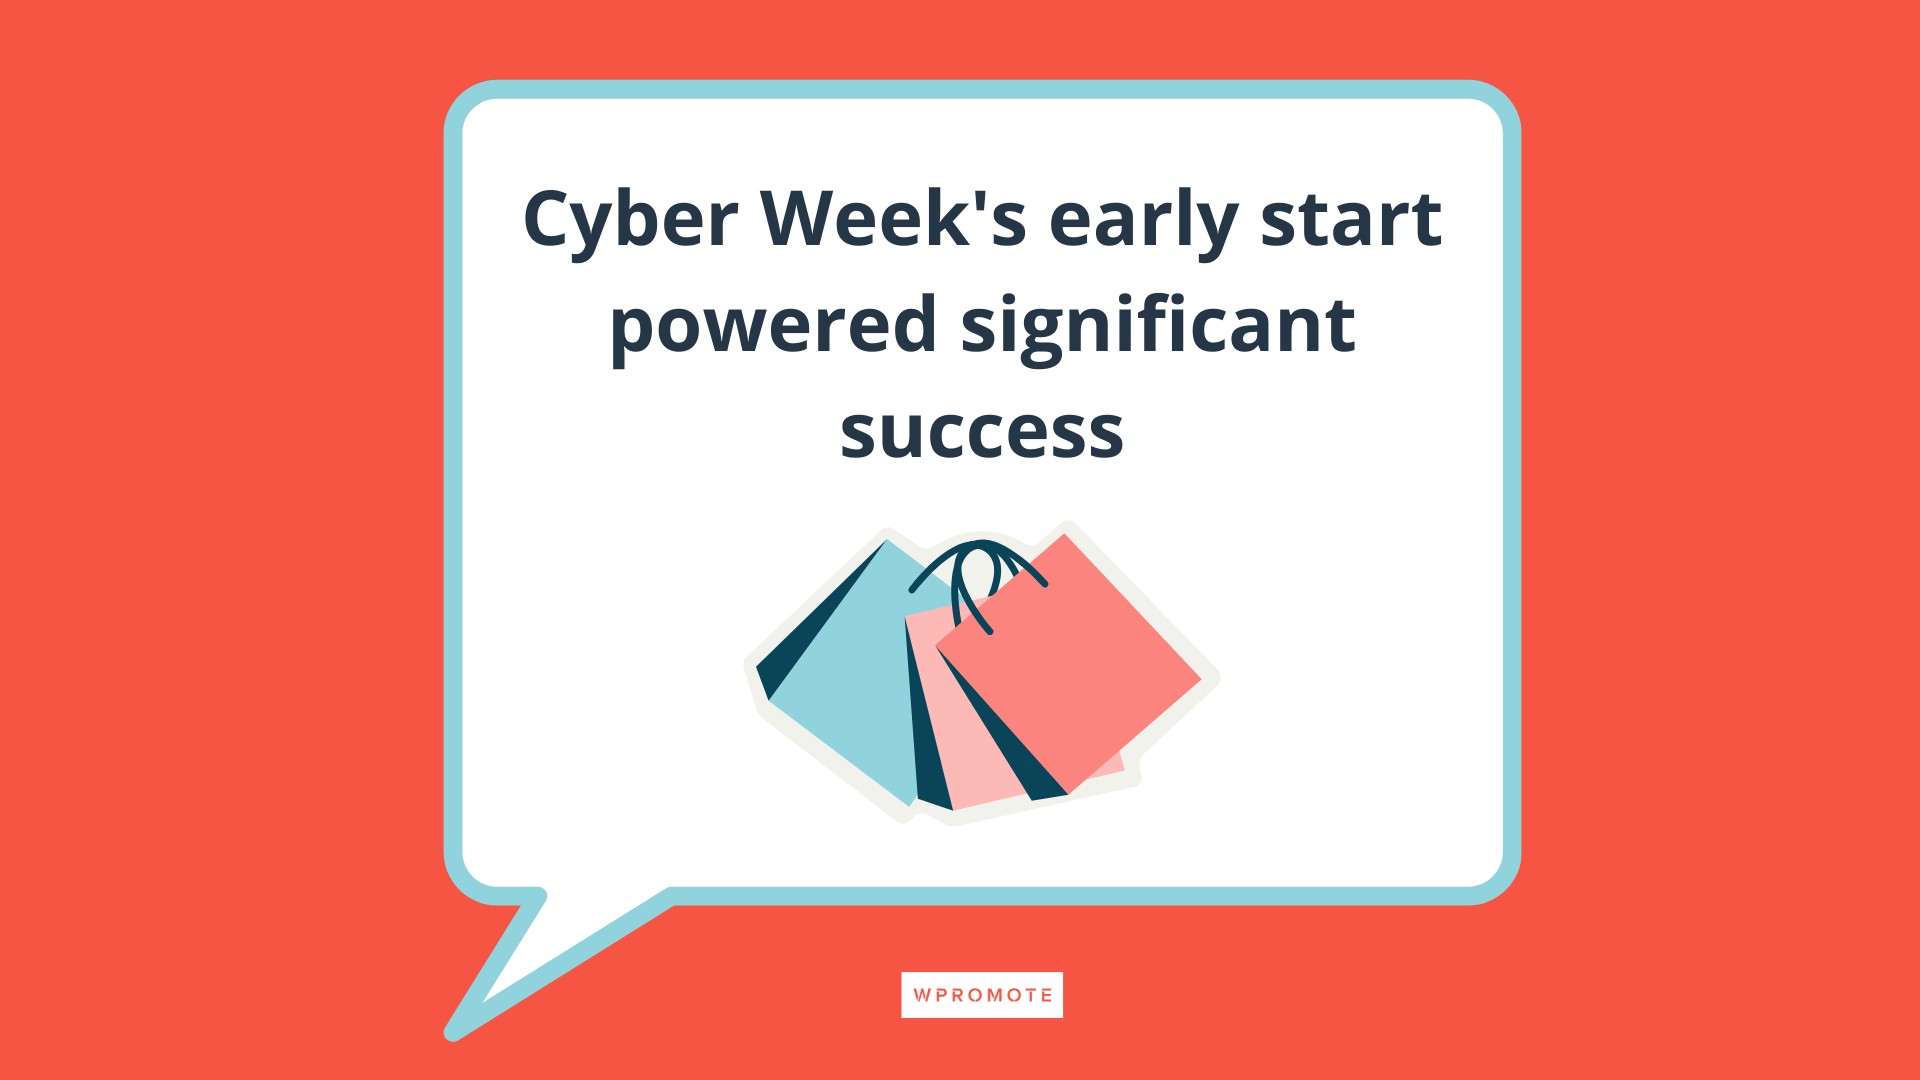 Cyber week's early start powered significant success